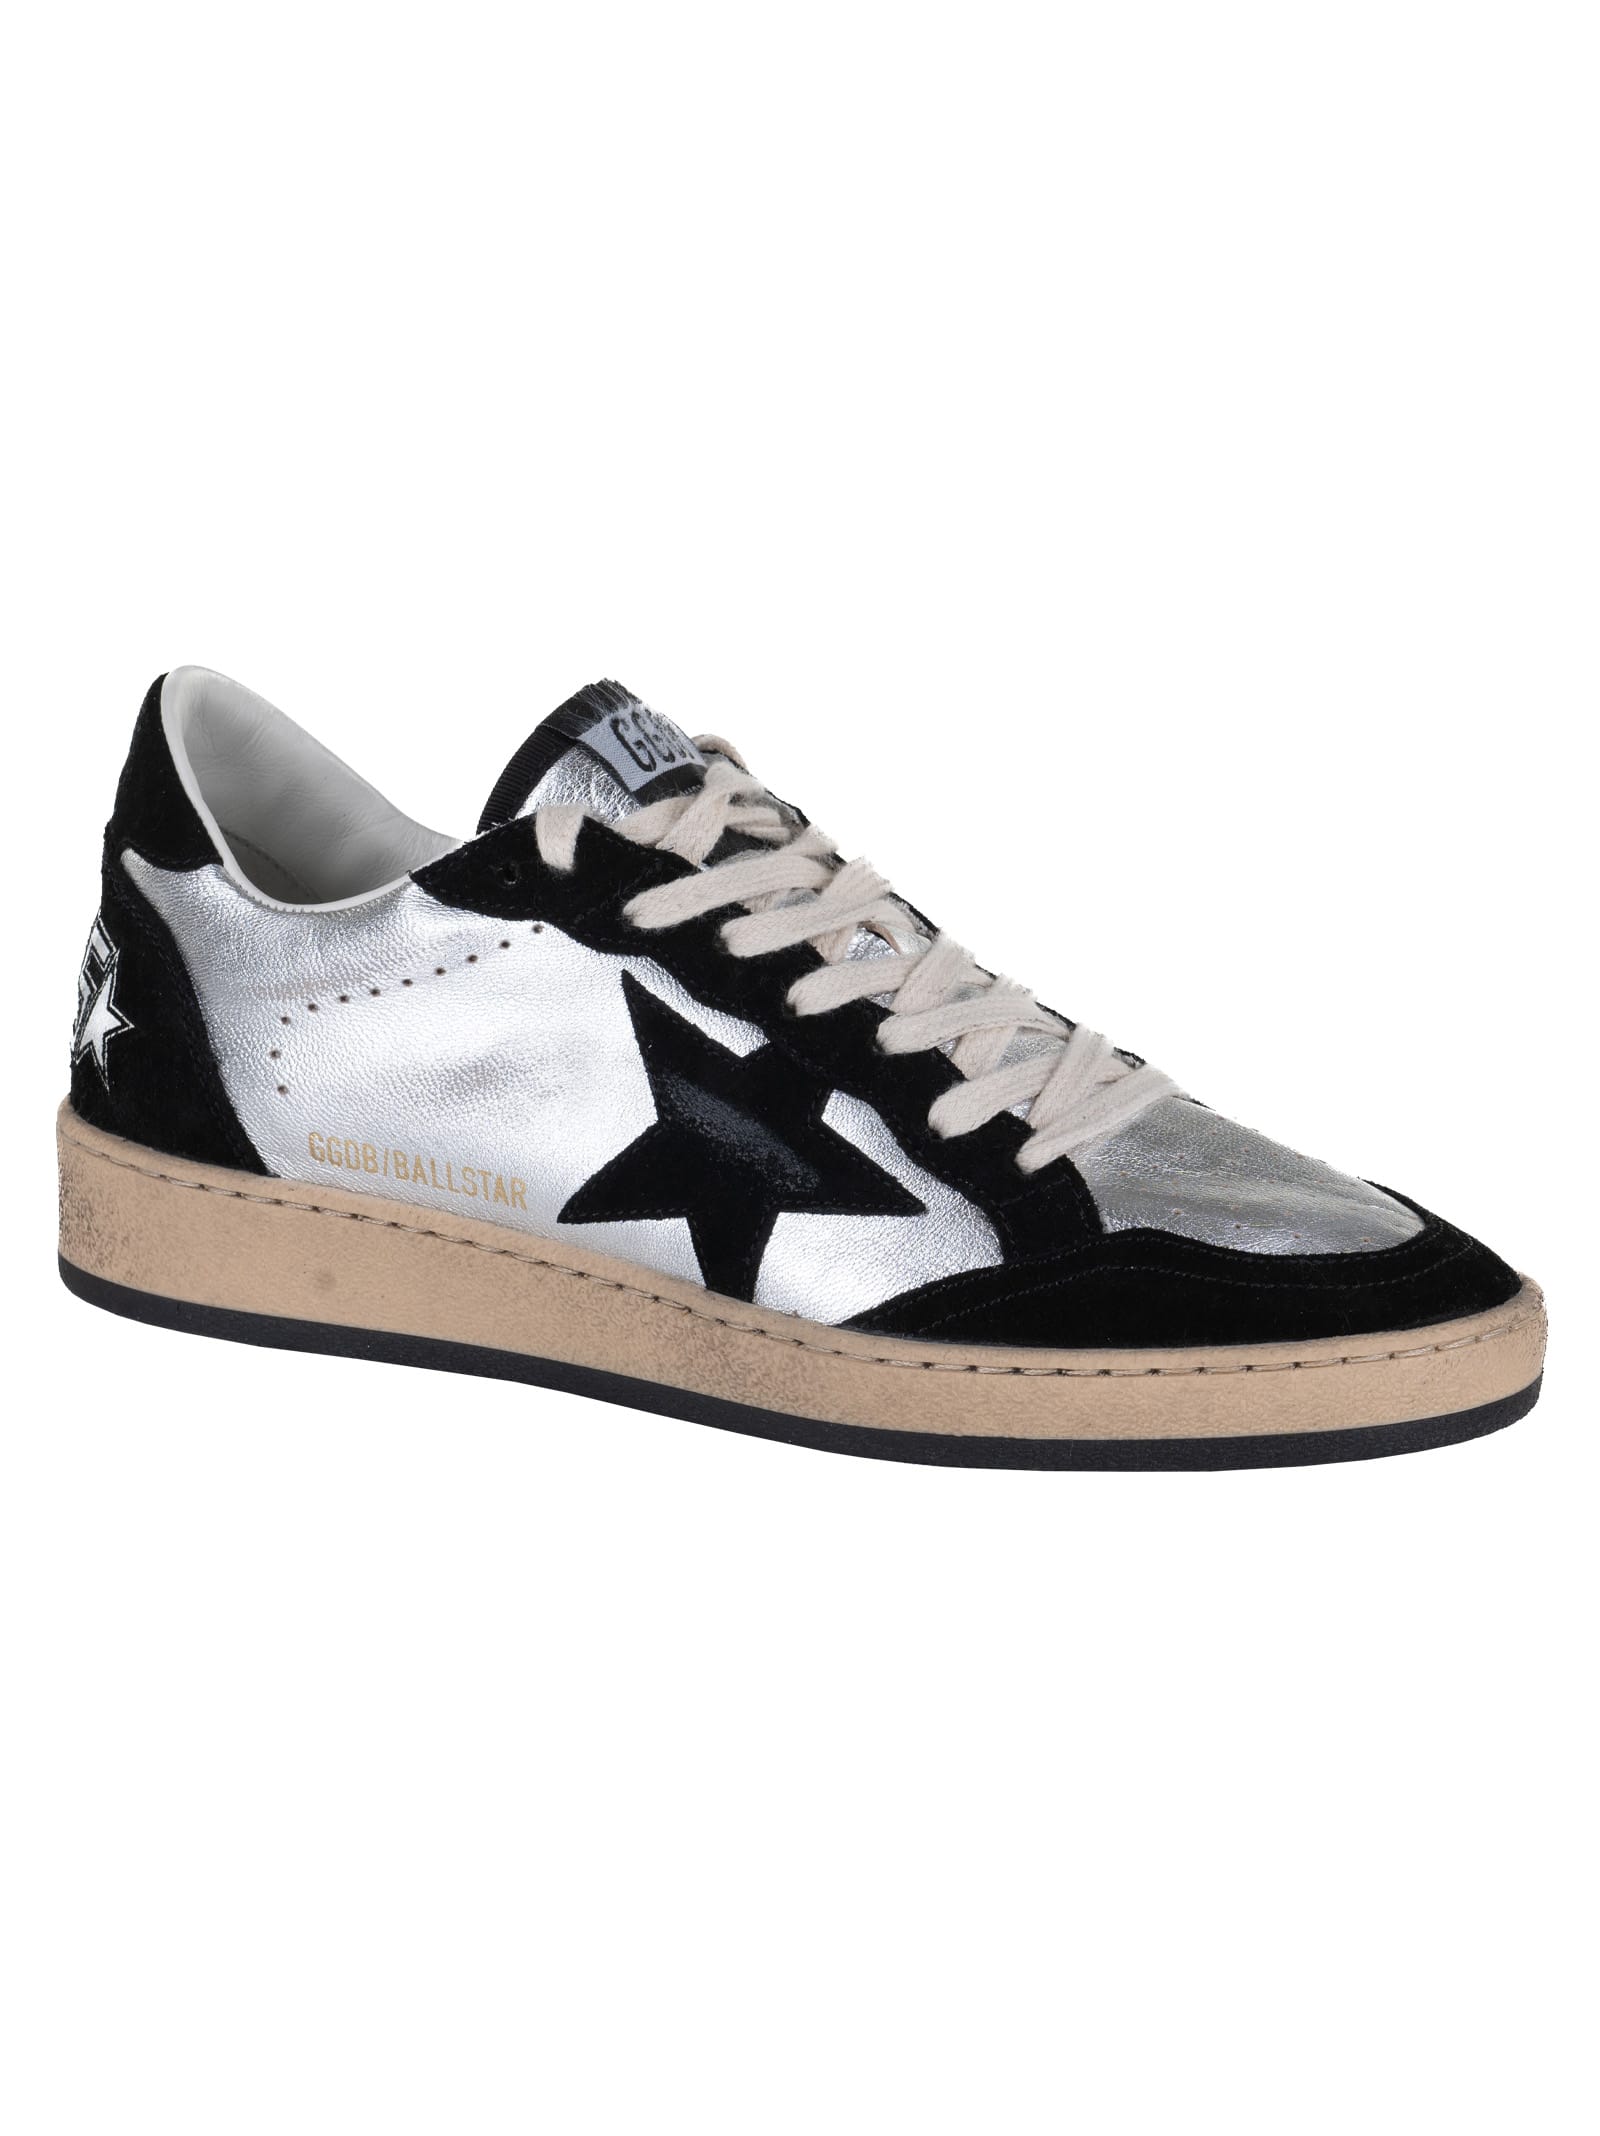 Golden Goose Sneakers Ball Star Laminated Upper And Toe Box In Argento ...